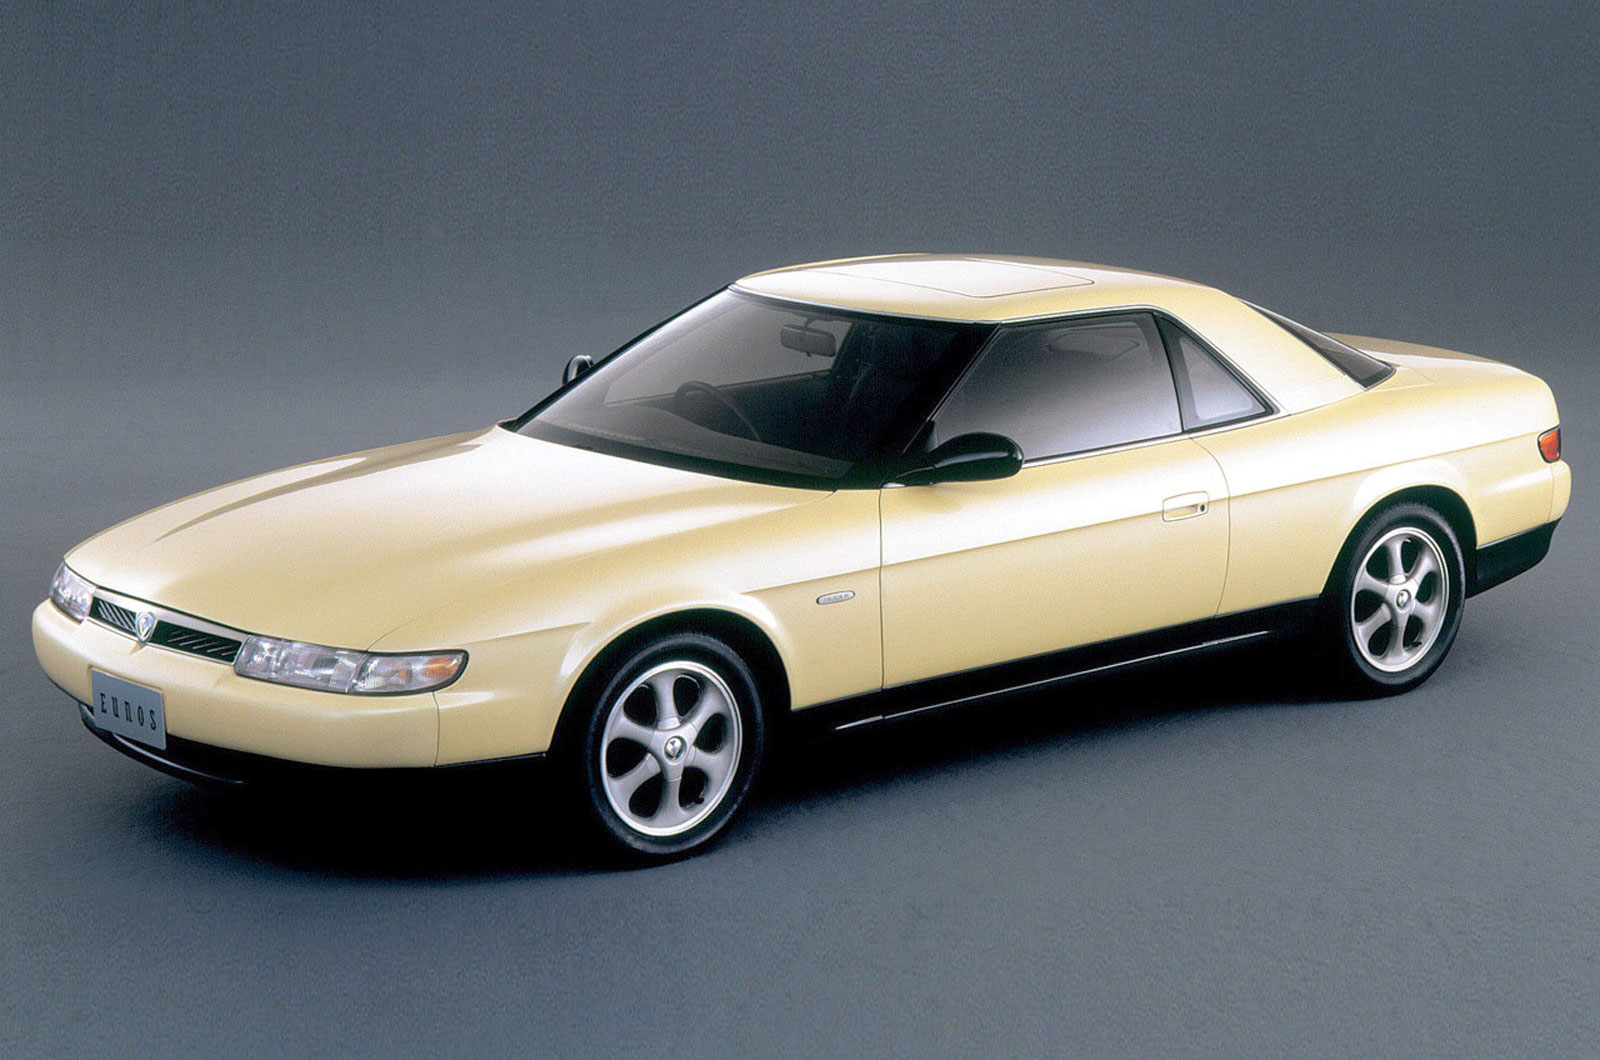 <p>The idea of an in-built navigation system has been around since the 1950s but it wasn’t until 1990, with the arrival of the <strong>Mazda Eunos Cosmo</strong>, that the tech became a satellite-guided reality, operating via Global Positioning System (GPS) satellites operated by the US Air Force (now US Space Force).</p><p>However, the system was vague in precise location by design, as the military feared that a more accurate system would be used and abused by terrorists. However, there were workarounds available, and in any case in 2000 President Clinton signed an executive order to make GPS as accurate for civilians as it was for the military. Today the most advanced GPS can pinpoint one’s location to the nearest 30cm (12in).</p><p><strong>GROUNDBREAKER SCORE: 8 </strong>– a massive change for the better.</p>